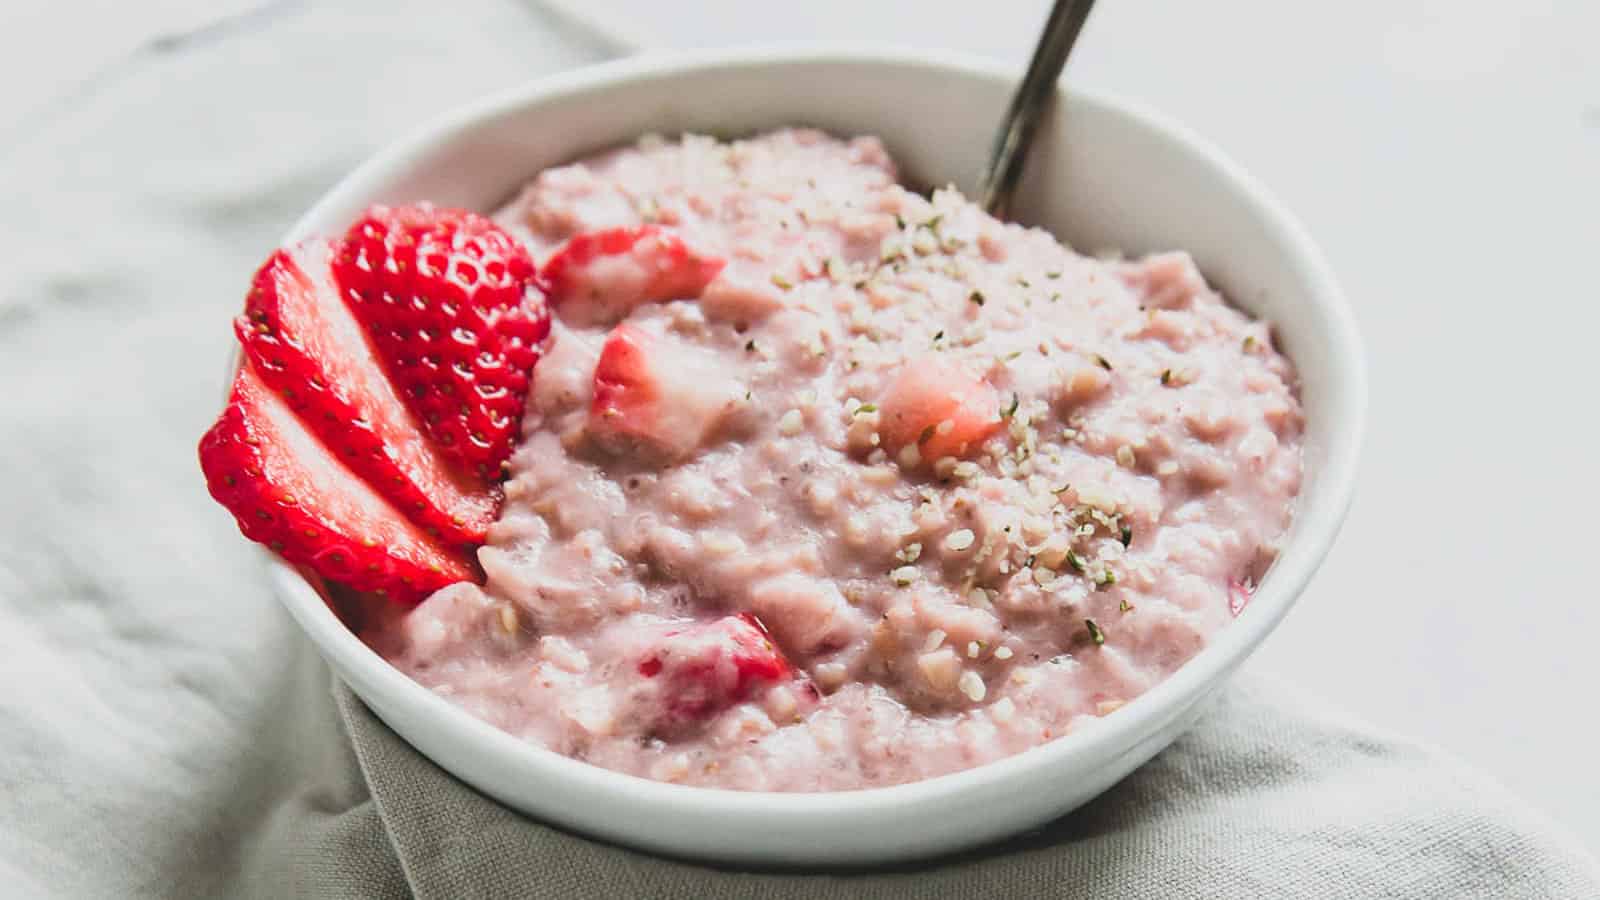 <p>A protein-rich oatmeal with natural strawberry flavor, offering a creamy and satisfying start to your day.<br><strong>Get the Recipe: </strong><a href="https://www.runningtothekitchen.com/strawberry-oatmeal/?utm_source=msn&utm_medium=page&utm_campaign=msn">Strawberry Oatmeal</a></p>